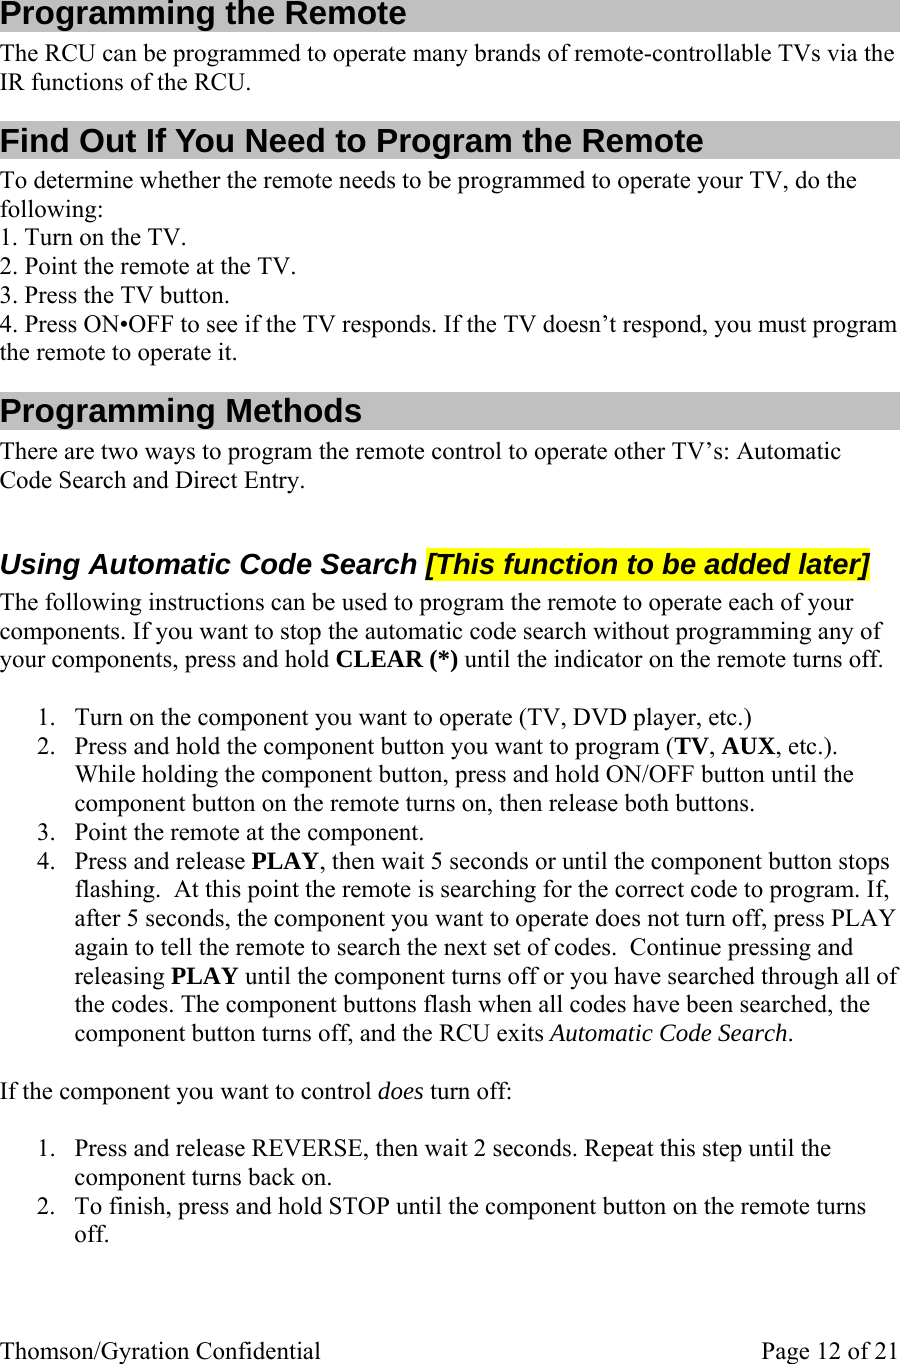 Thomson/Gyration Confidential    Page 12 of 21  Programming the Remote The RCU can be programmed to operate many brands of remote-controllable TVs via the IR functions of the RCU. Find Out If You Need to Program the Remote To determine whether the remote needs to be programmed to operate your TV, do the following: 1. Turn on the TV. 2. Point the remote at the TV. 3. Press the TV button. 4. Press ON•OFF to see if the TV responds. If the TV doesn’t respond, you must program the remote to operate it. Programming Methods There are two ways to program the remote control to operate other TV’s: Automatic Code Search and Direct Entry.  Using Automatic Code Search [This function to be added later] The following instructions can be used to program the remote to operate each of your components. If you want to stop the automatic code search without programming any of your components, press and hold CLEAR (*) until the indicator on the remote turns off.  1. Turn on the component you want to operate (TV, DVD player, etc.) 2. Press and hold the component button you want to program (TV, AUX, etc.). While holding the component button, press and hold ON/OFF button until the component button on the remote turns on, then release both buttons. 3. Point the remote at the component. 4. Press and release PLAY, then wait 5 seconds or until the component button stops flashing.  At this point the remote is searching for the correct code to program. If, after 5 seconds, the component you want to operate does not turn off, press PLAY again to tell the remote to search the next set of codes.  Continue pressing and releasing PLAY until the component turns off or you have searched through all of the codes. The component buttons flash when all codes have been searched, the component button turns off, and the RCU exits Automatic Code Search.  If the component you want to control does turn off:  1. Press and release REVERSE, then wait 2 seconds. Repeat this step until the component turns back on. 2. To finish, press and hold STOP until the component button on the remote turns off.  